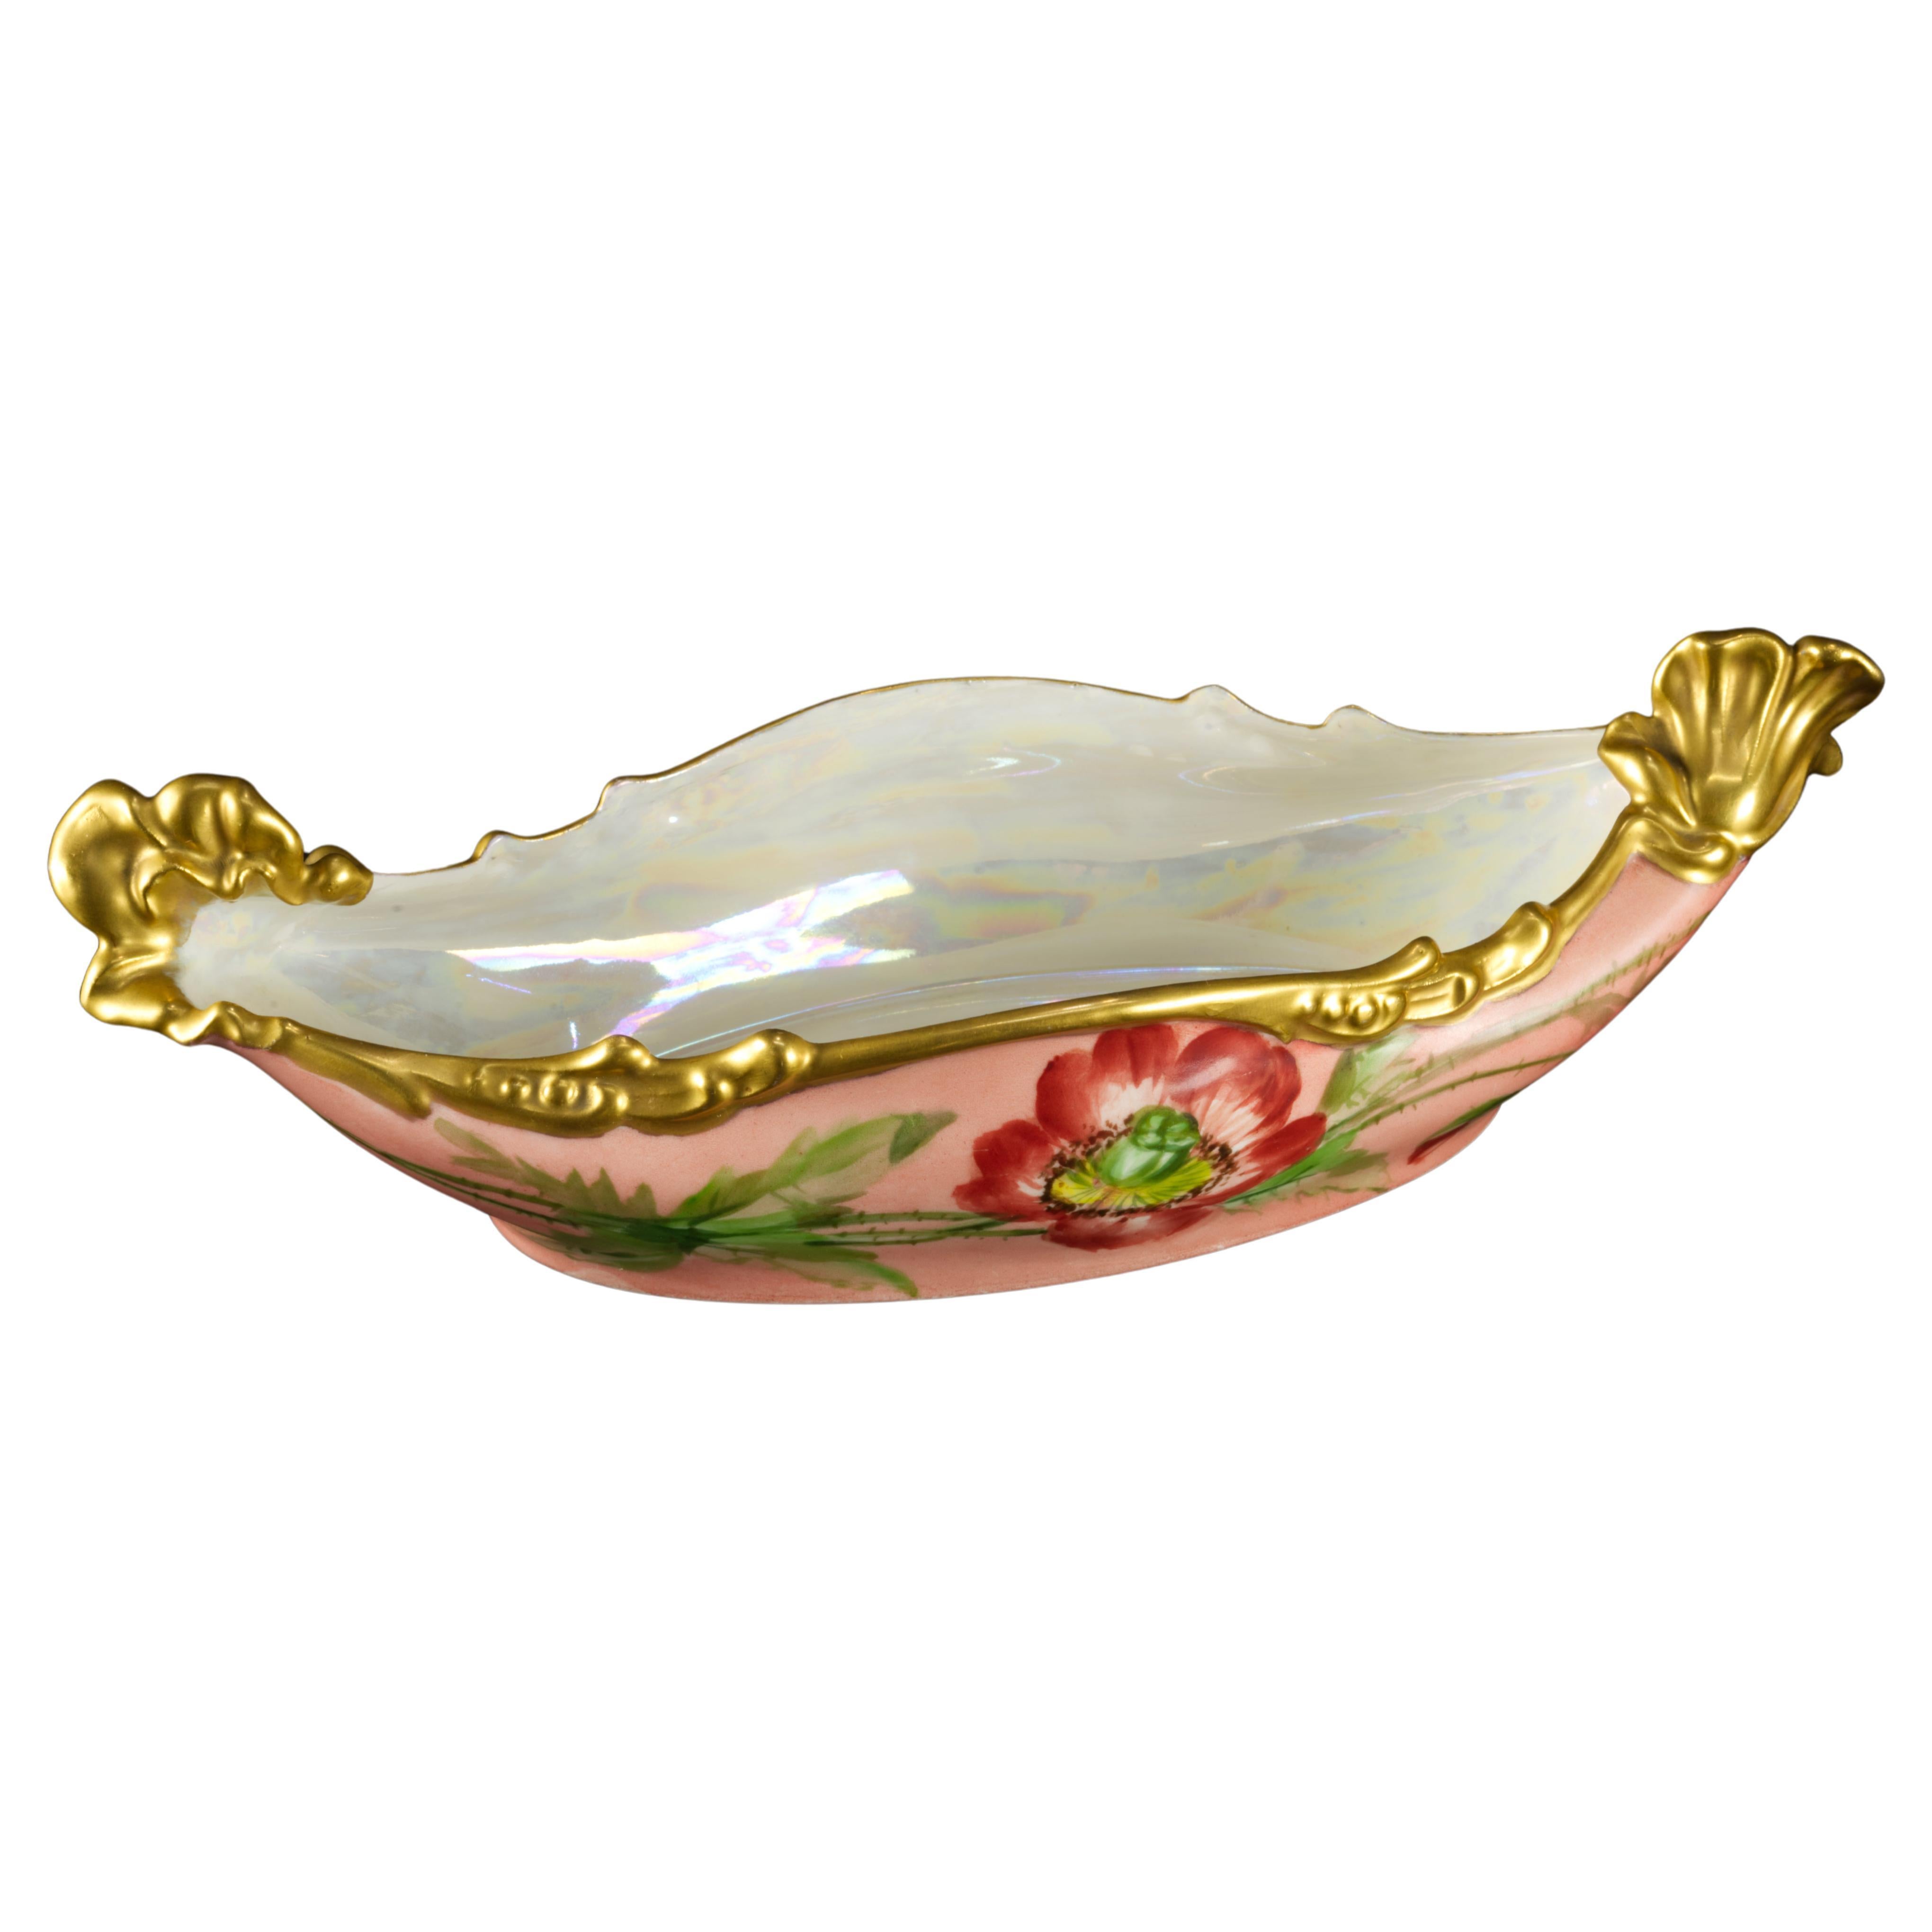 Rare Jean Pouyat Limoges France Oval Hand-painted Porcelain Ravier Bowl, 1926 For Sale